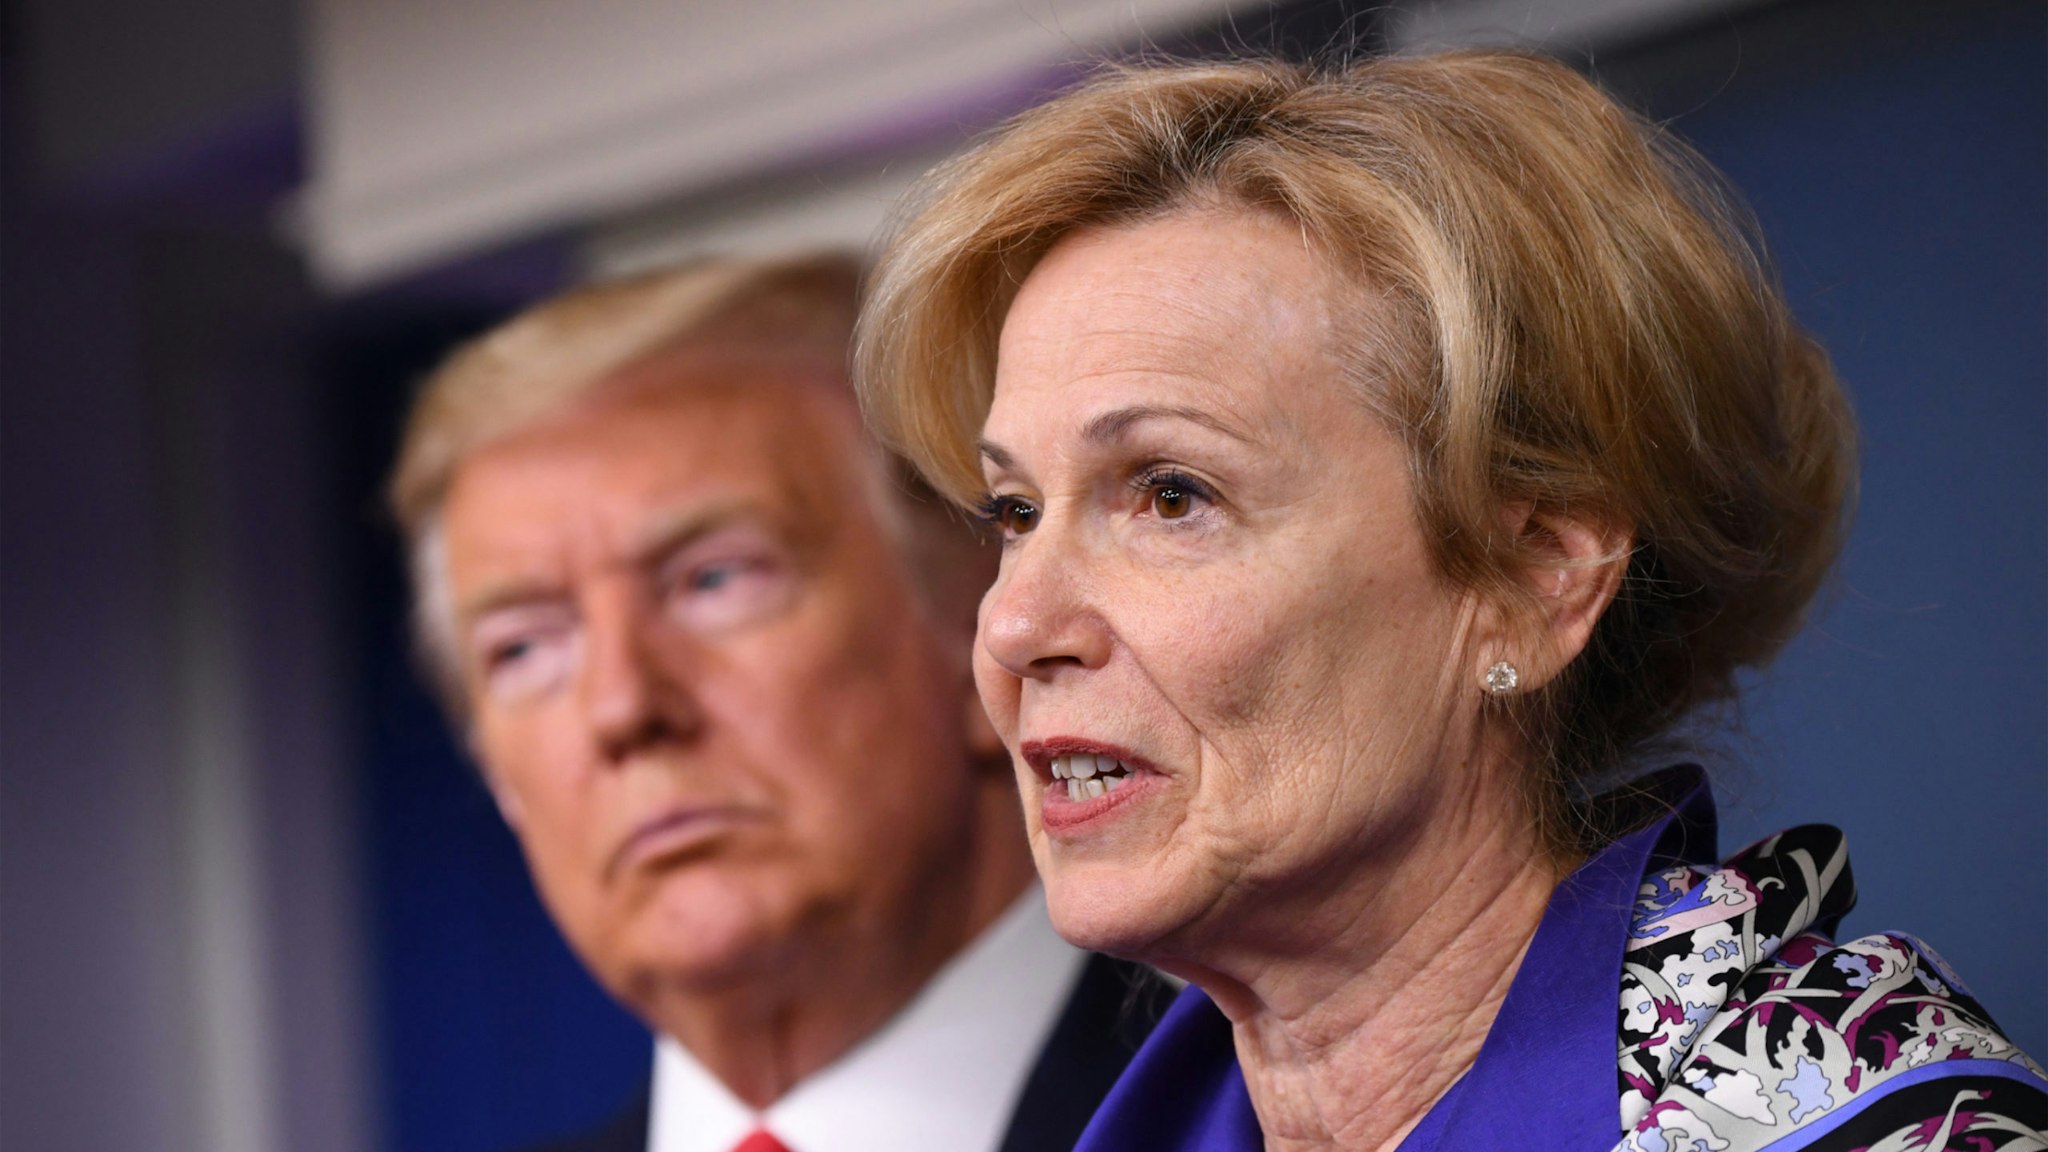 Deborah Birx, coronavirus response coordinator, speaks while U.S. President Donald Trump, left, listens during a Coronavirus Task Force news conference in the briefing room of the White House in Washington, D.C., U.S., on Wednesday, March 18, 2020.